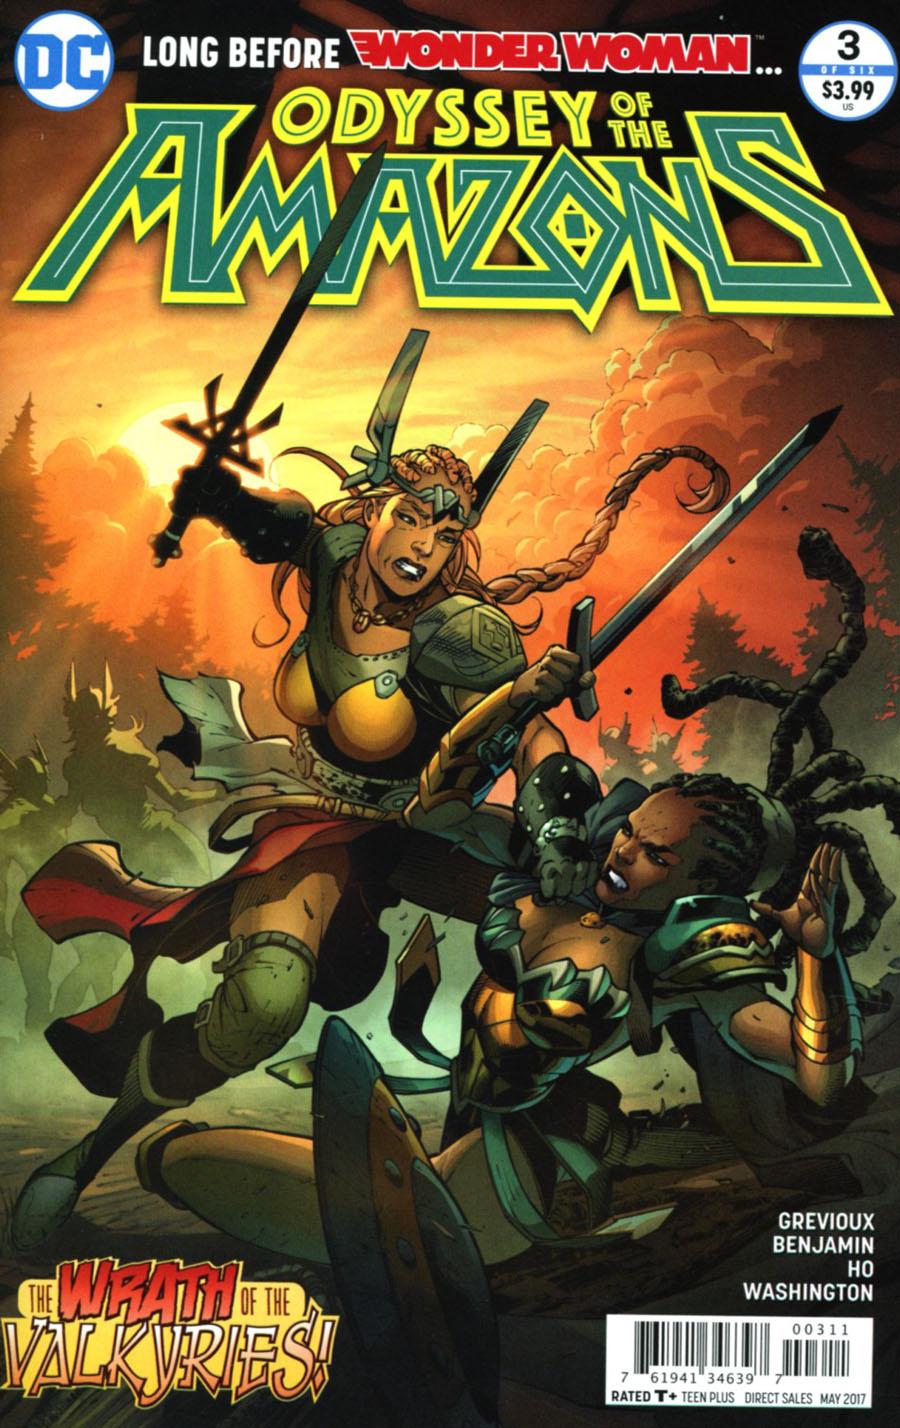 Odyssey Of The Amazons Vol. 1 #3